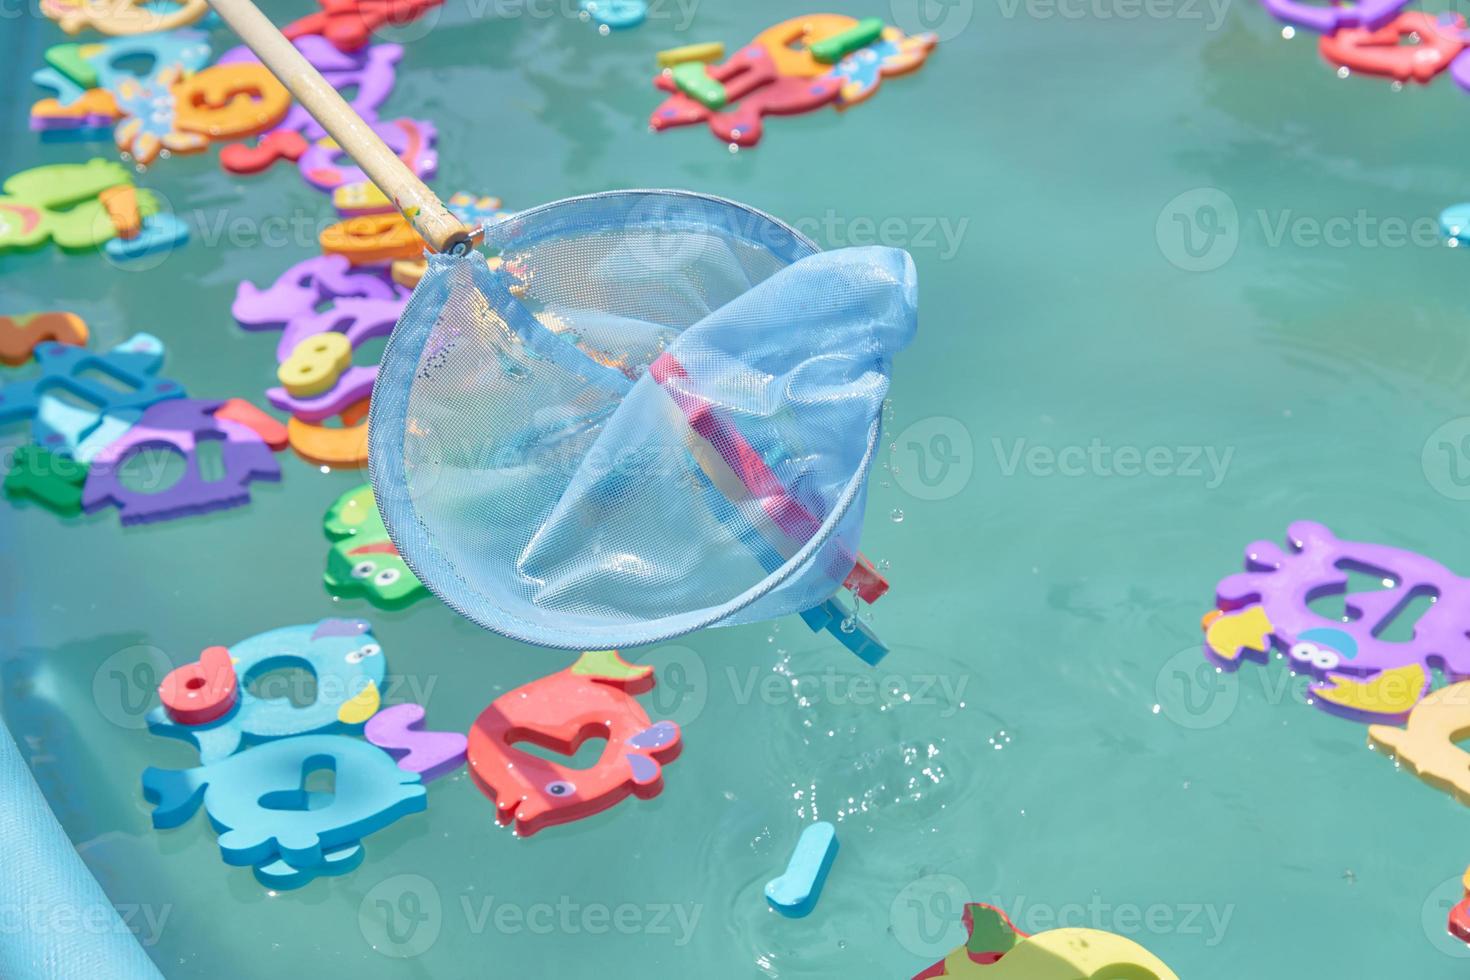 close up of floating colorful marine animal figures in the pool for catching a net. children's entertainment photo